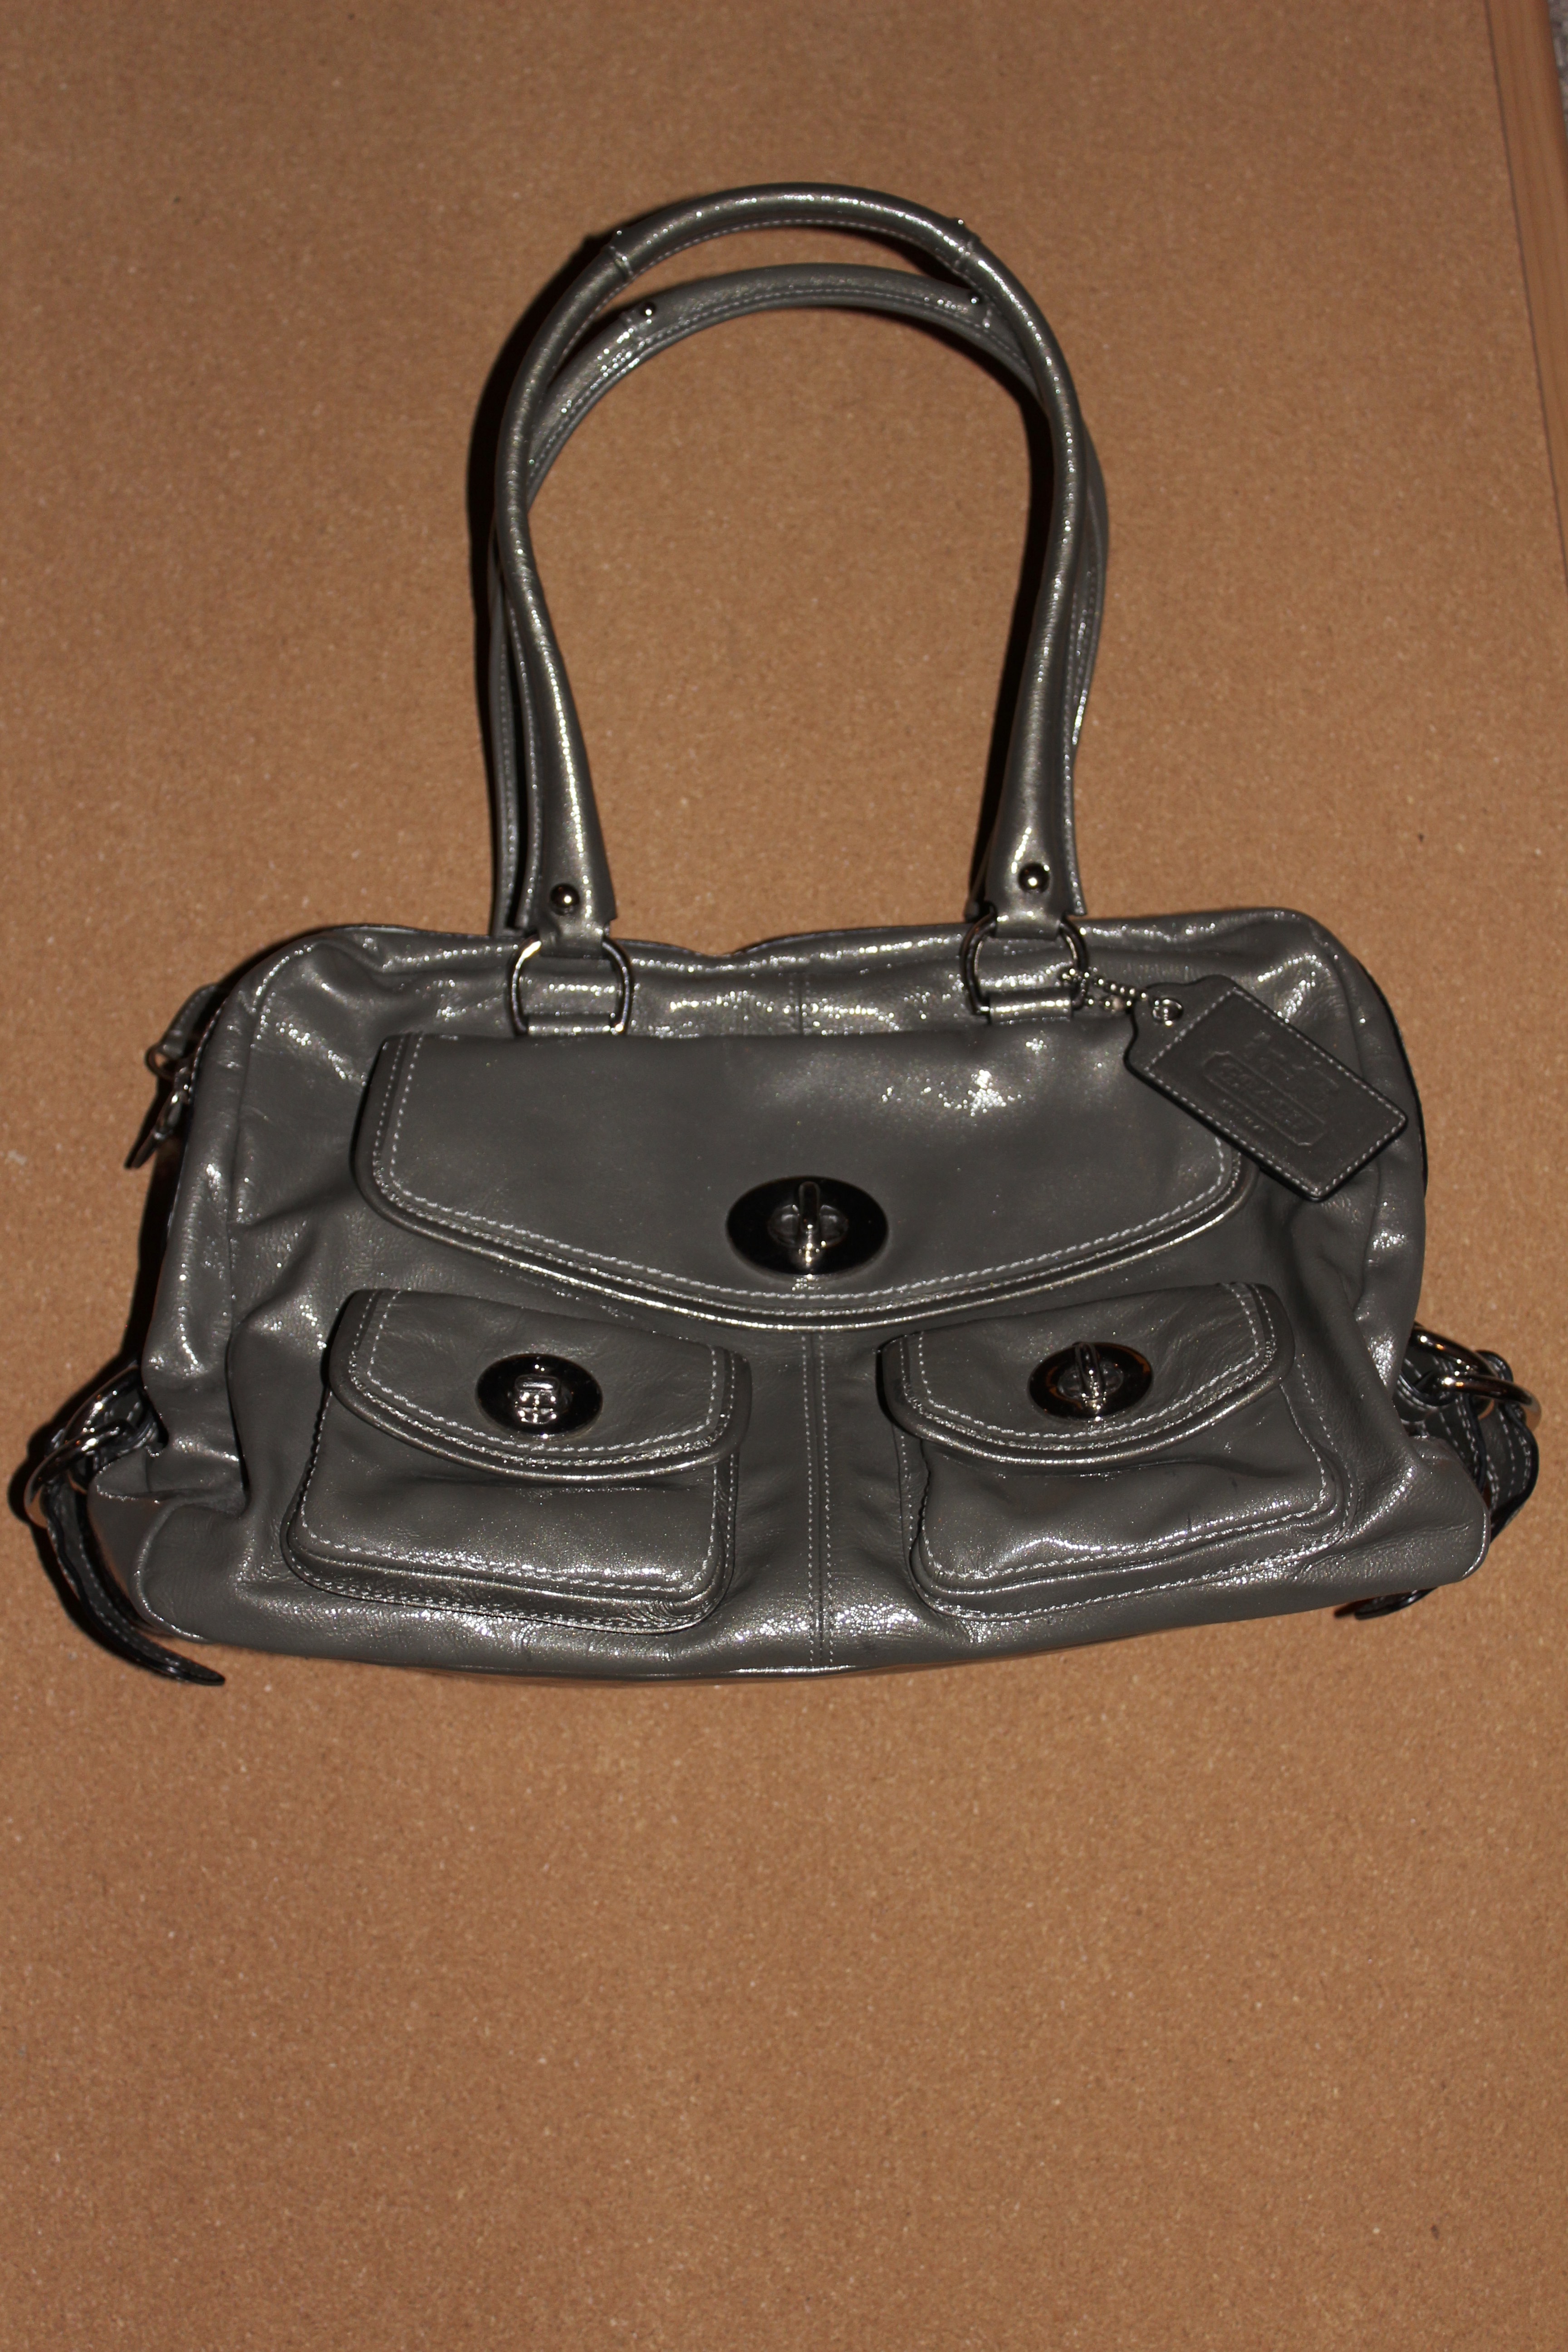 4 Gorgeous Coach Authentic Handbags - Never Used! For Sale | 0 | Classifieds